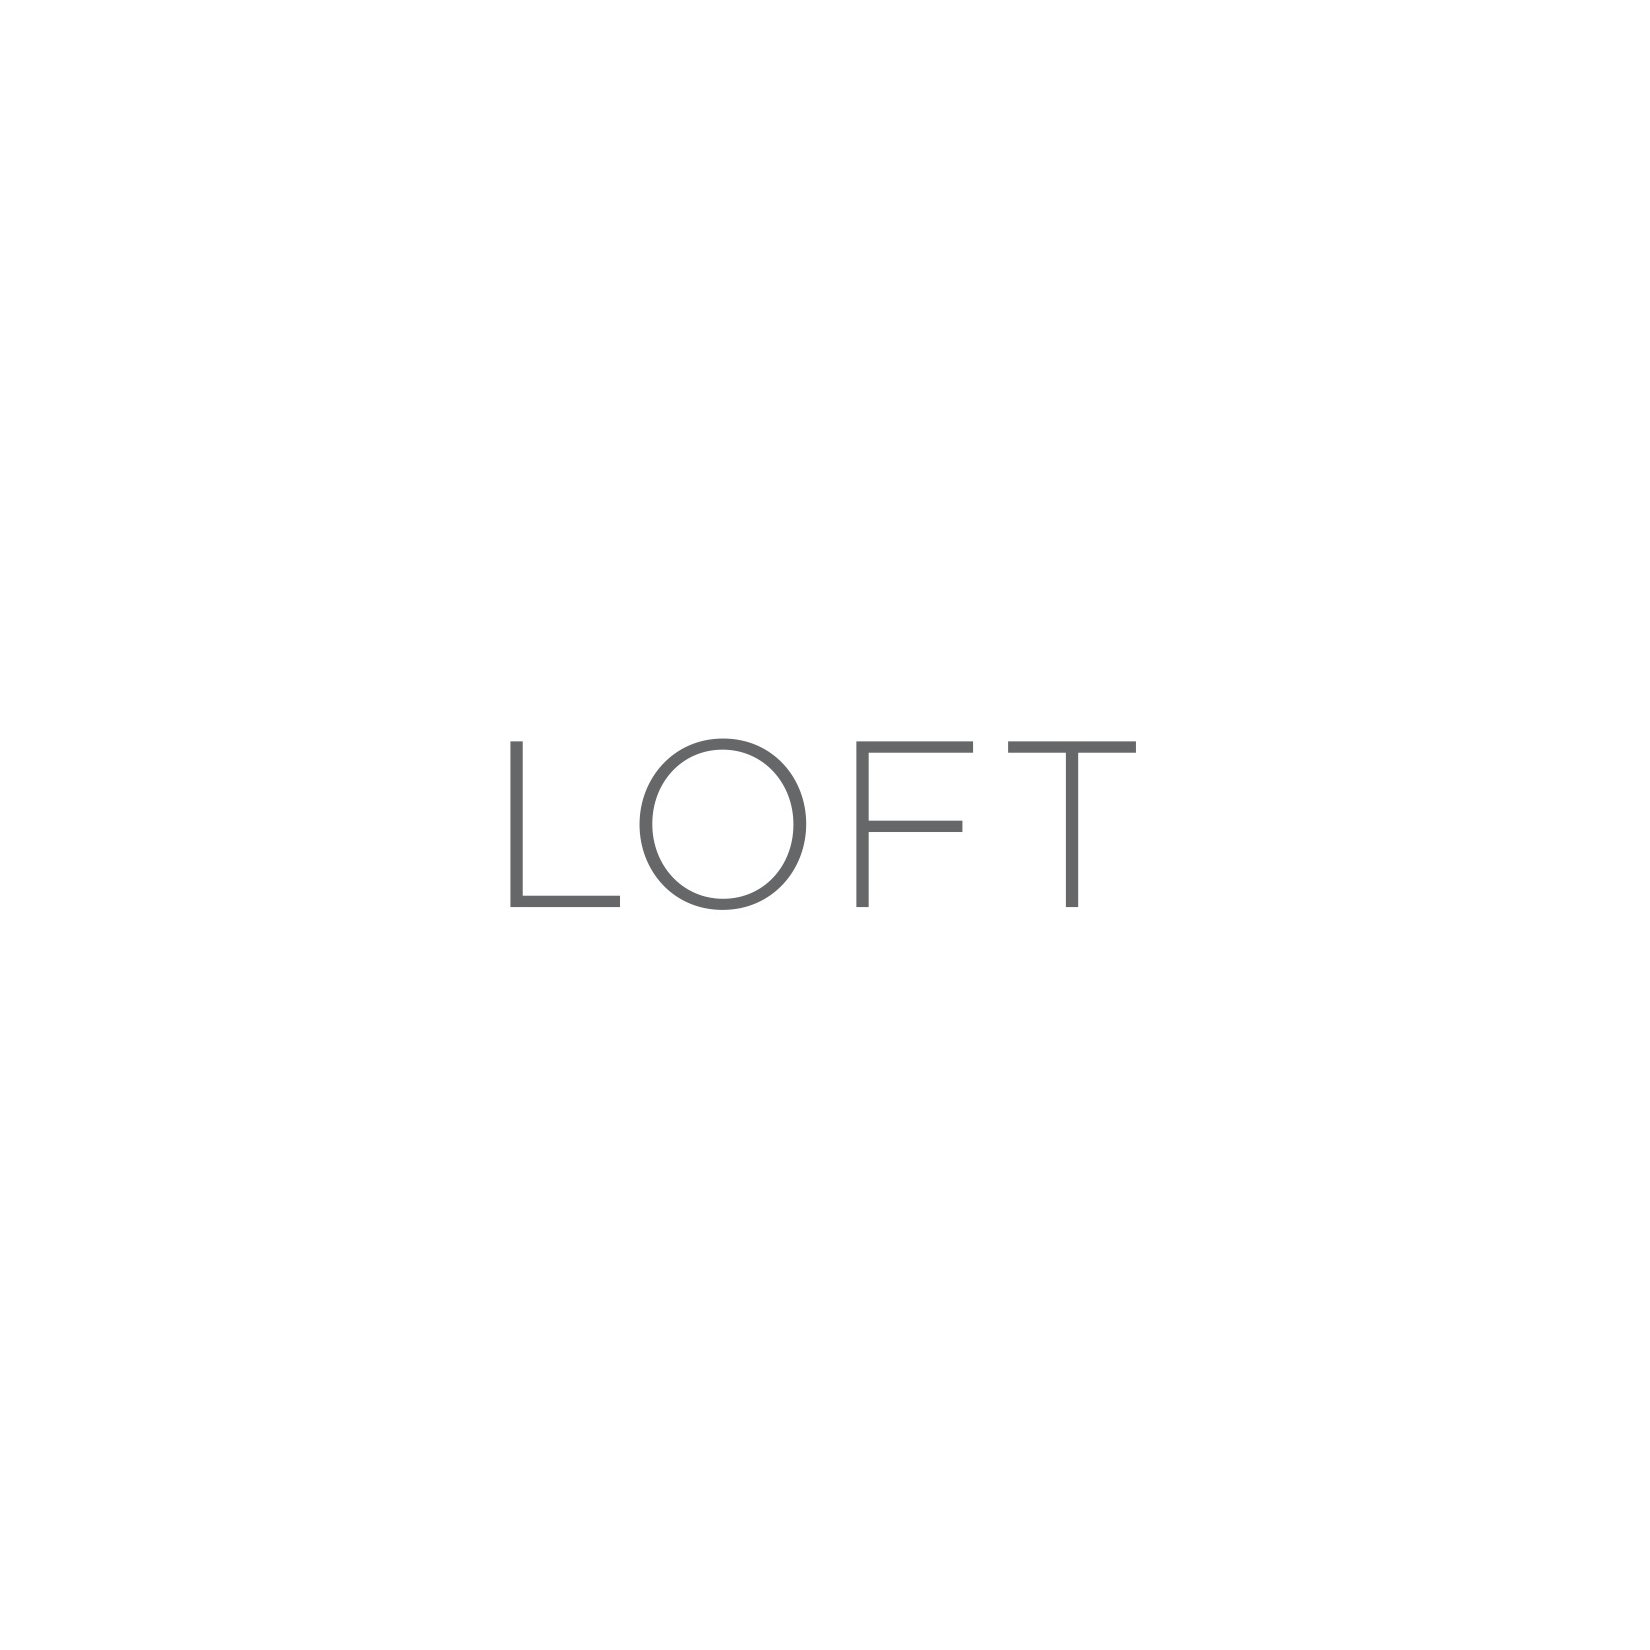 Loft Legacy Village At Spring Hill Women S Clothing Petites Dresses Pants Shirts Sweaters In Mobile Al [ 1650 x 1650 Pixel ]